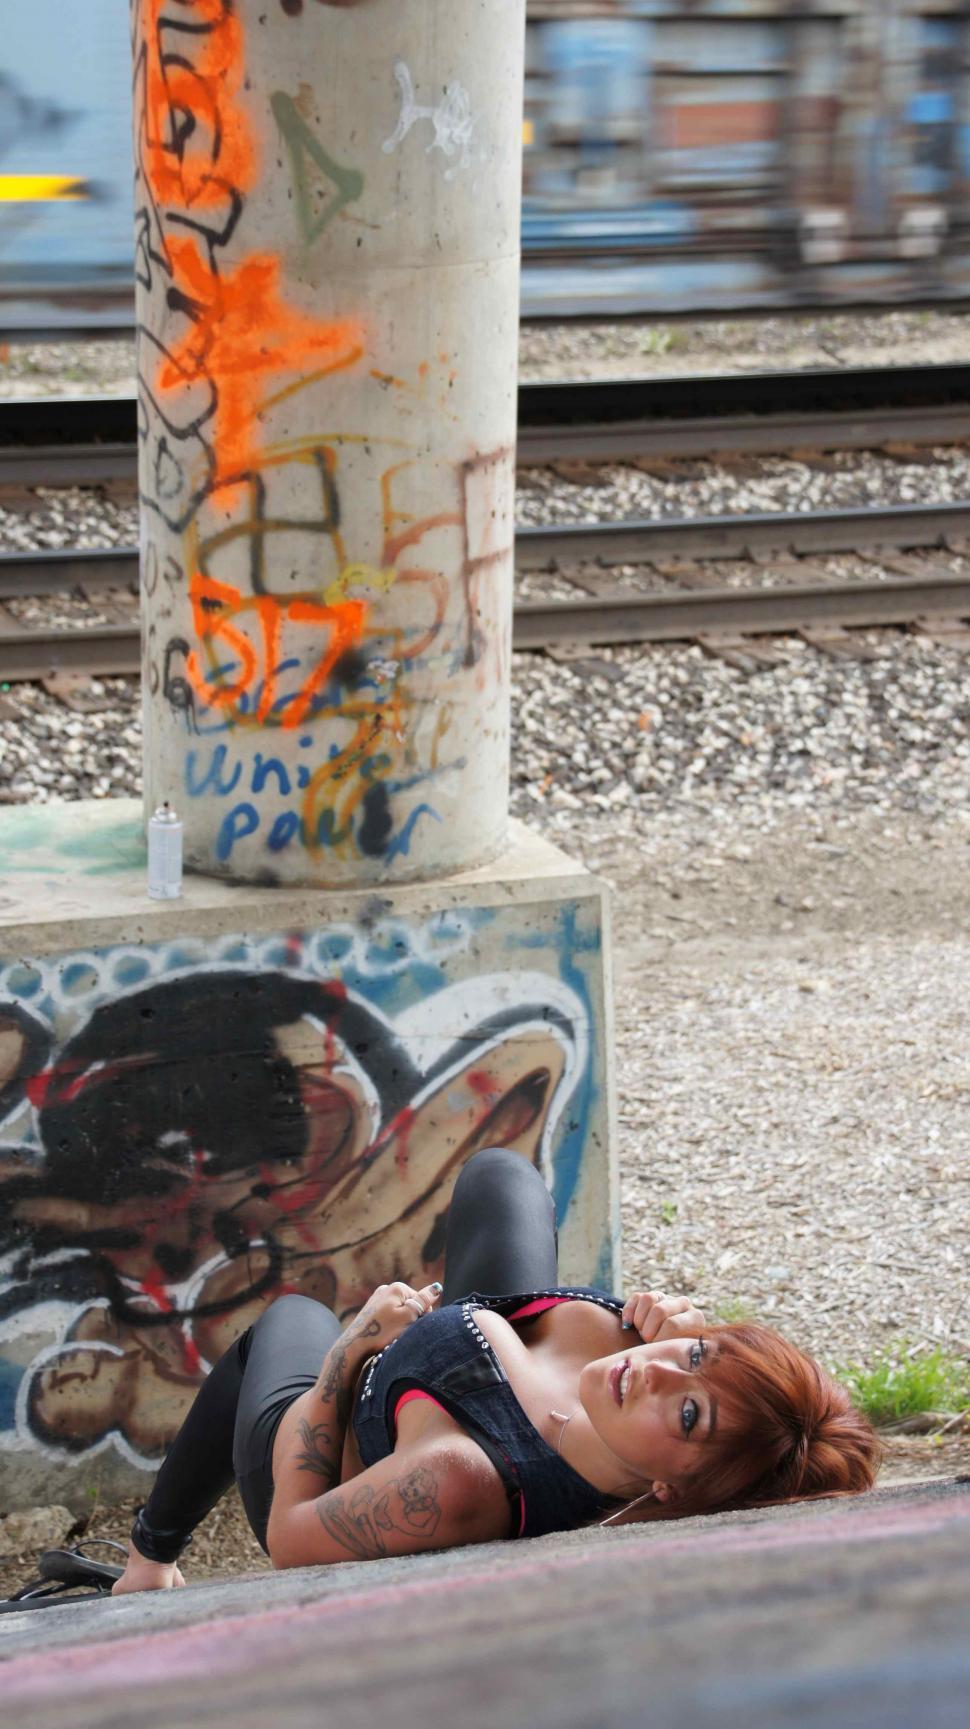 Free Image of Woman with Tattoos Poses with Graffiti 